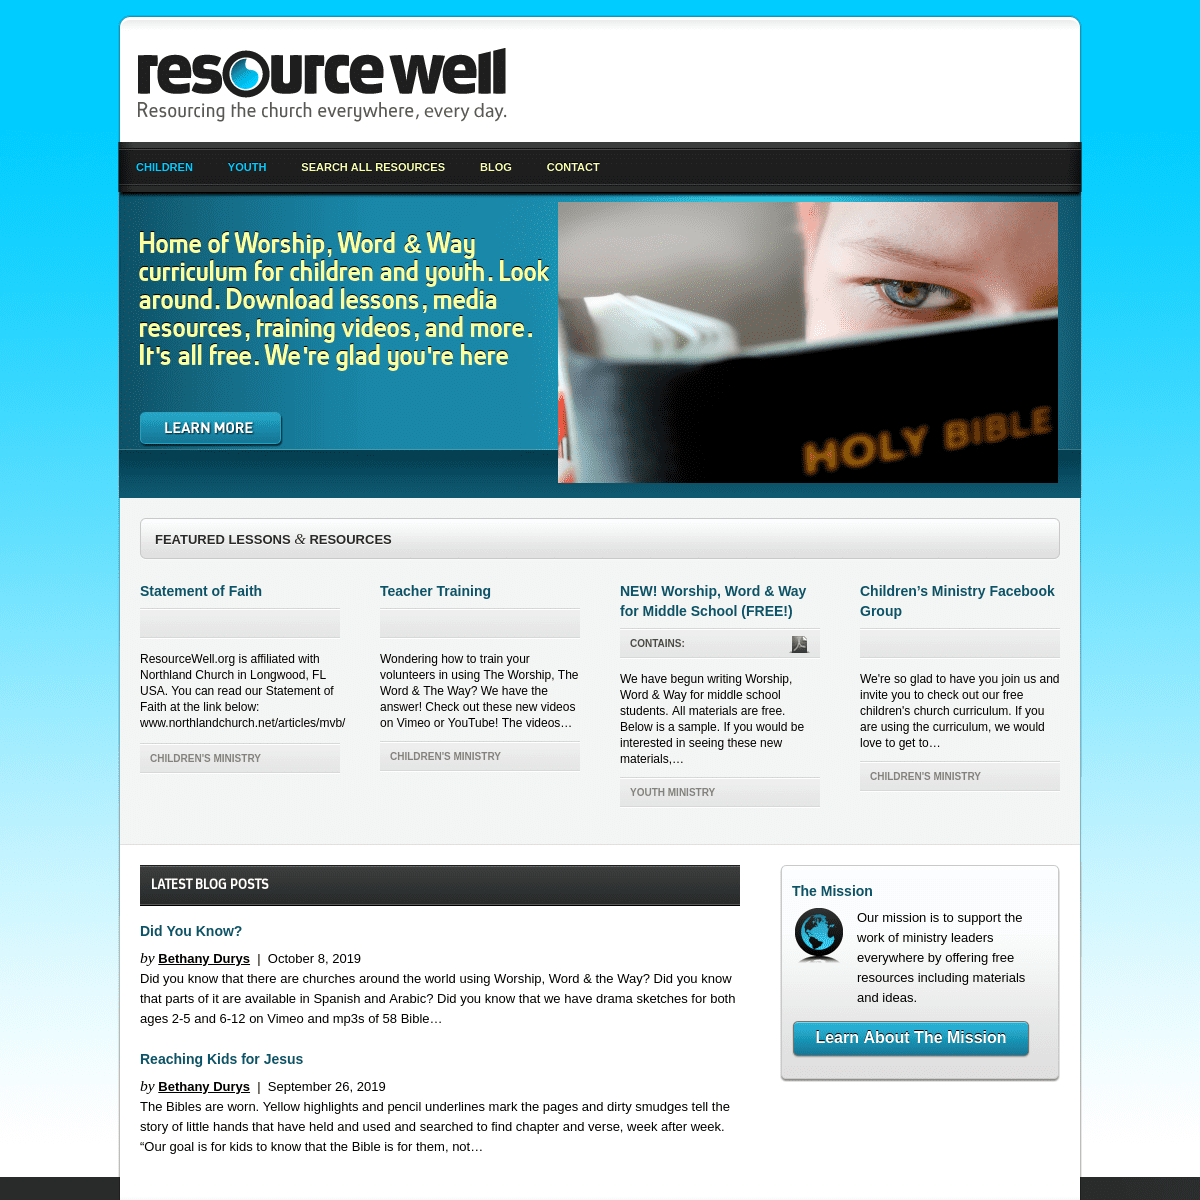 A complete backup of resourcewell.org